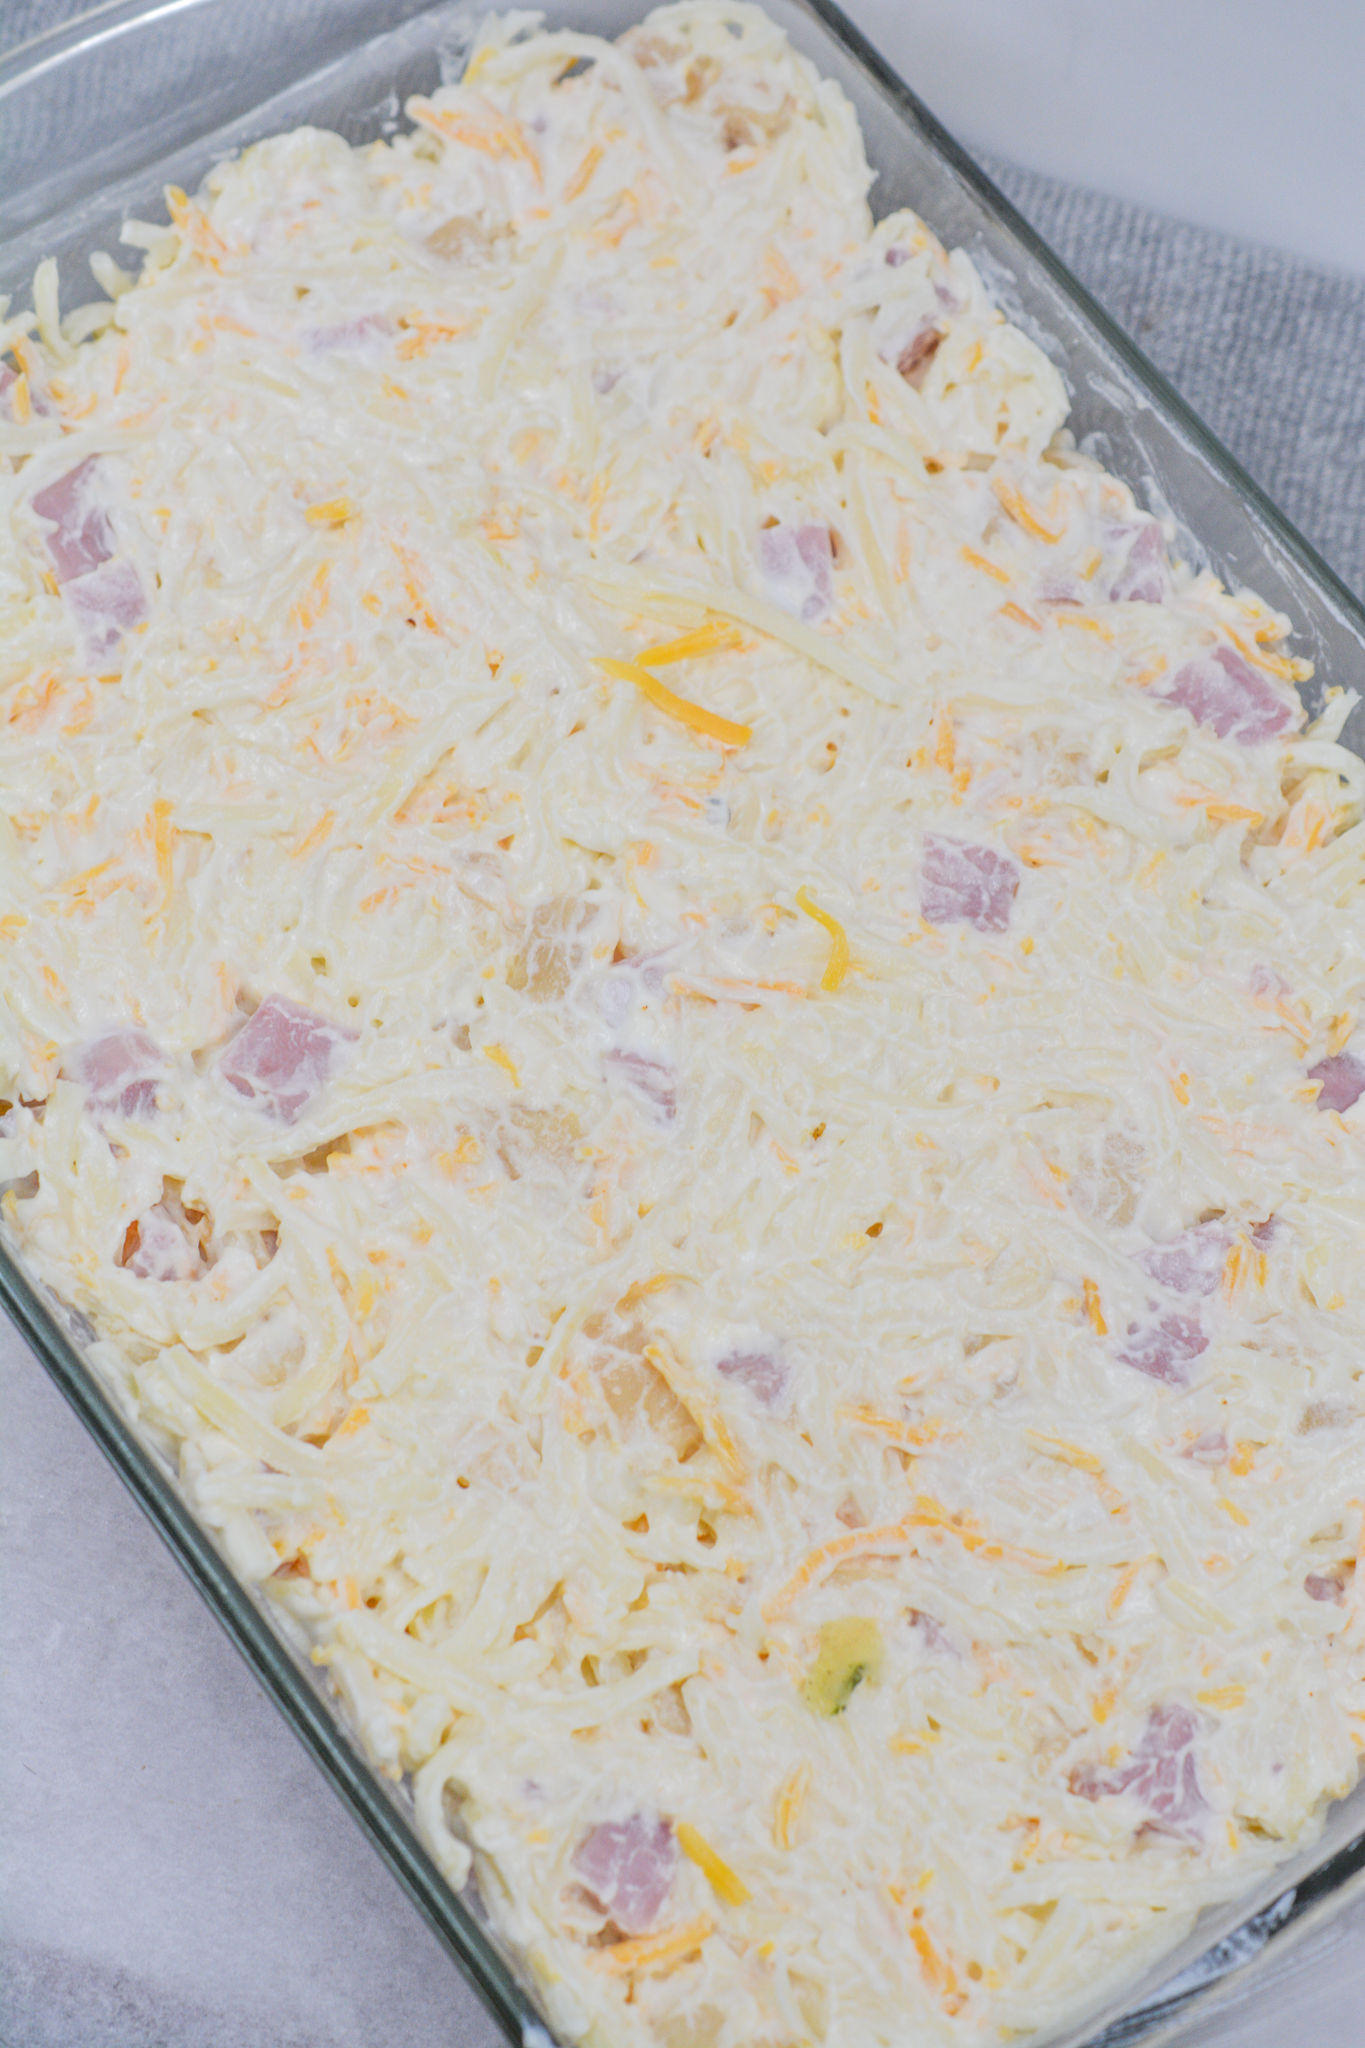 Ham And Cheese Hash Brown Casserole